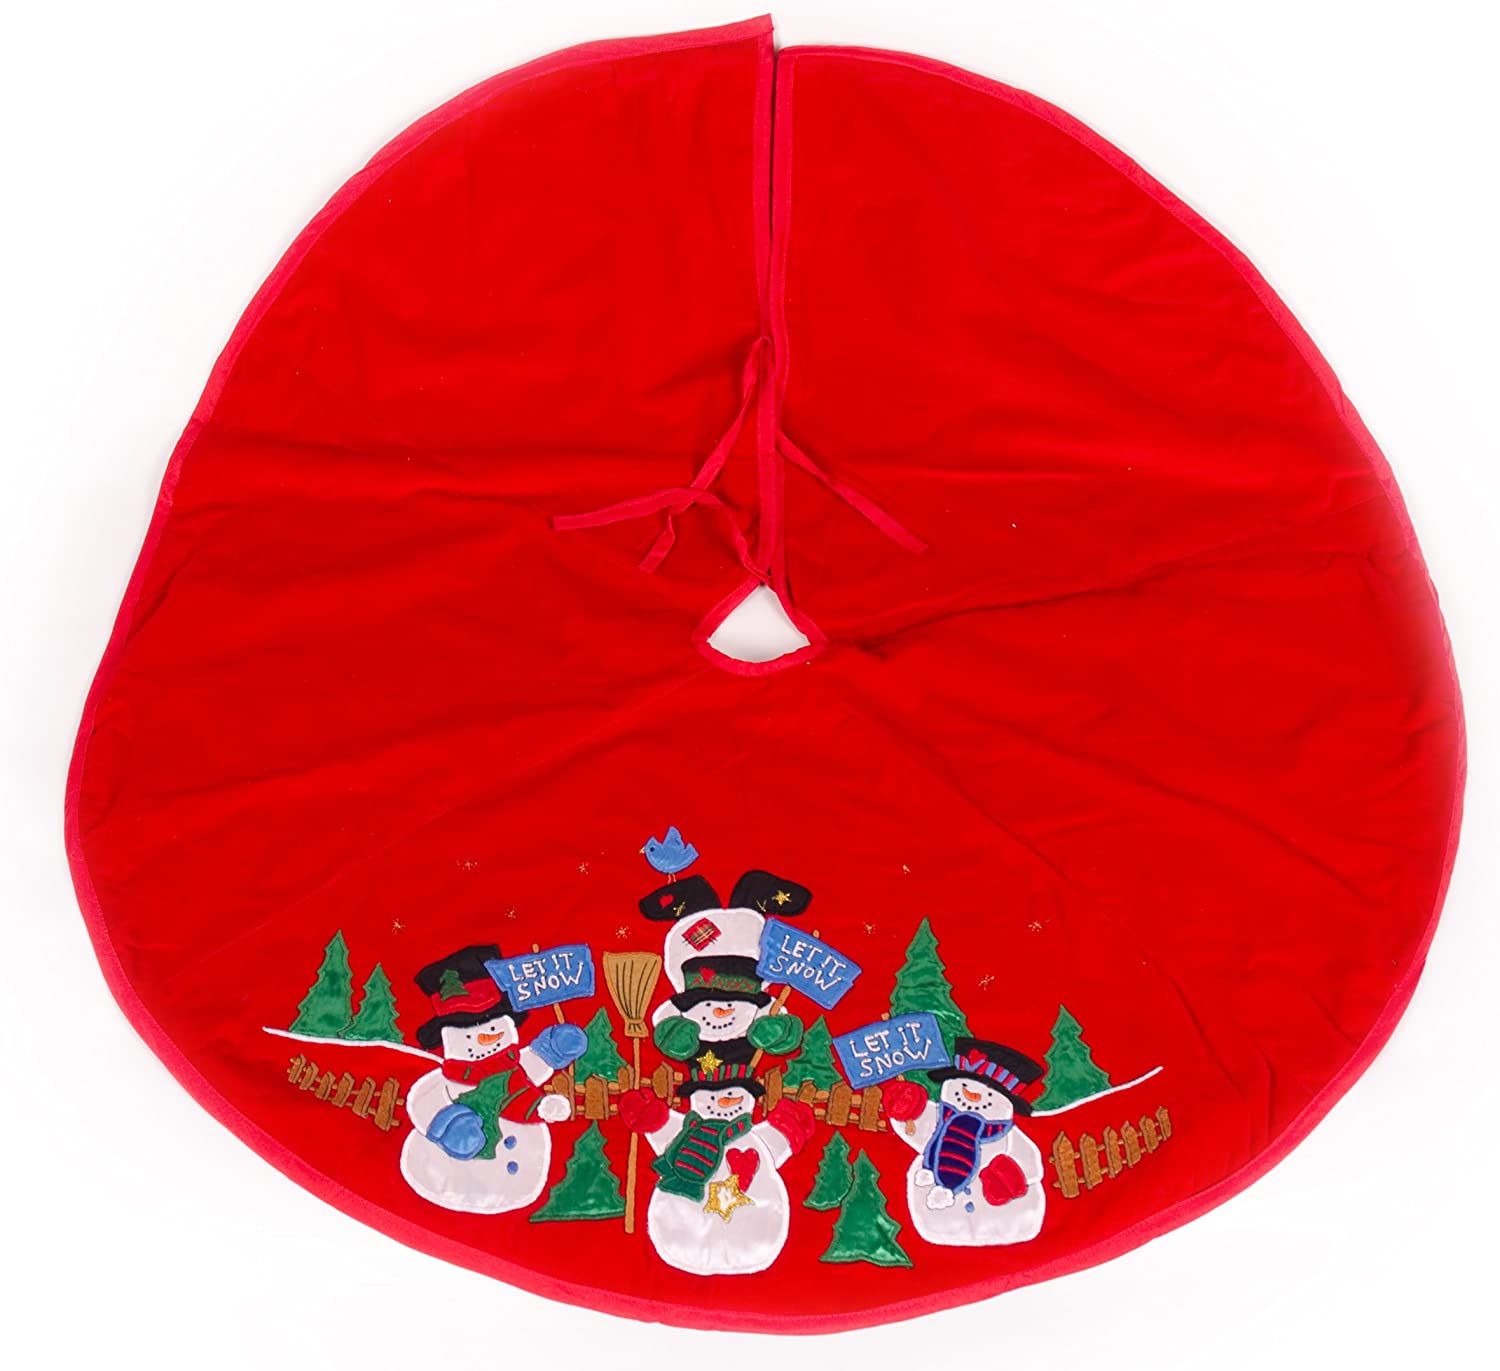 WeRChristmas 100 cm Large Christmas Tree Skirt Decoration with Snowman Let it Snow Design, Red